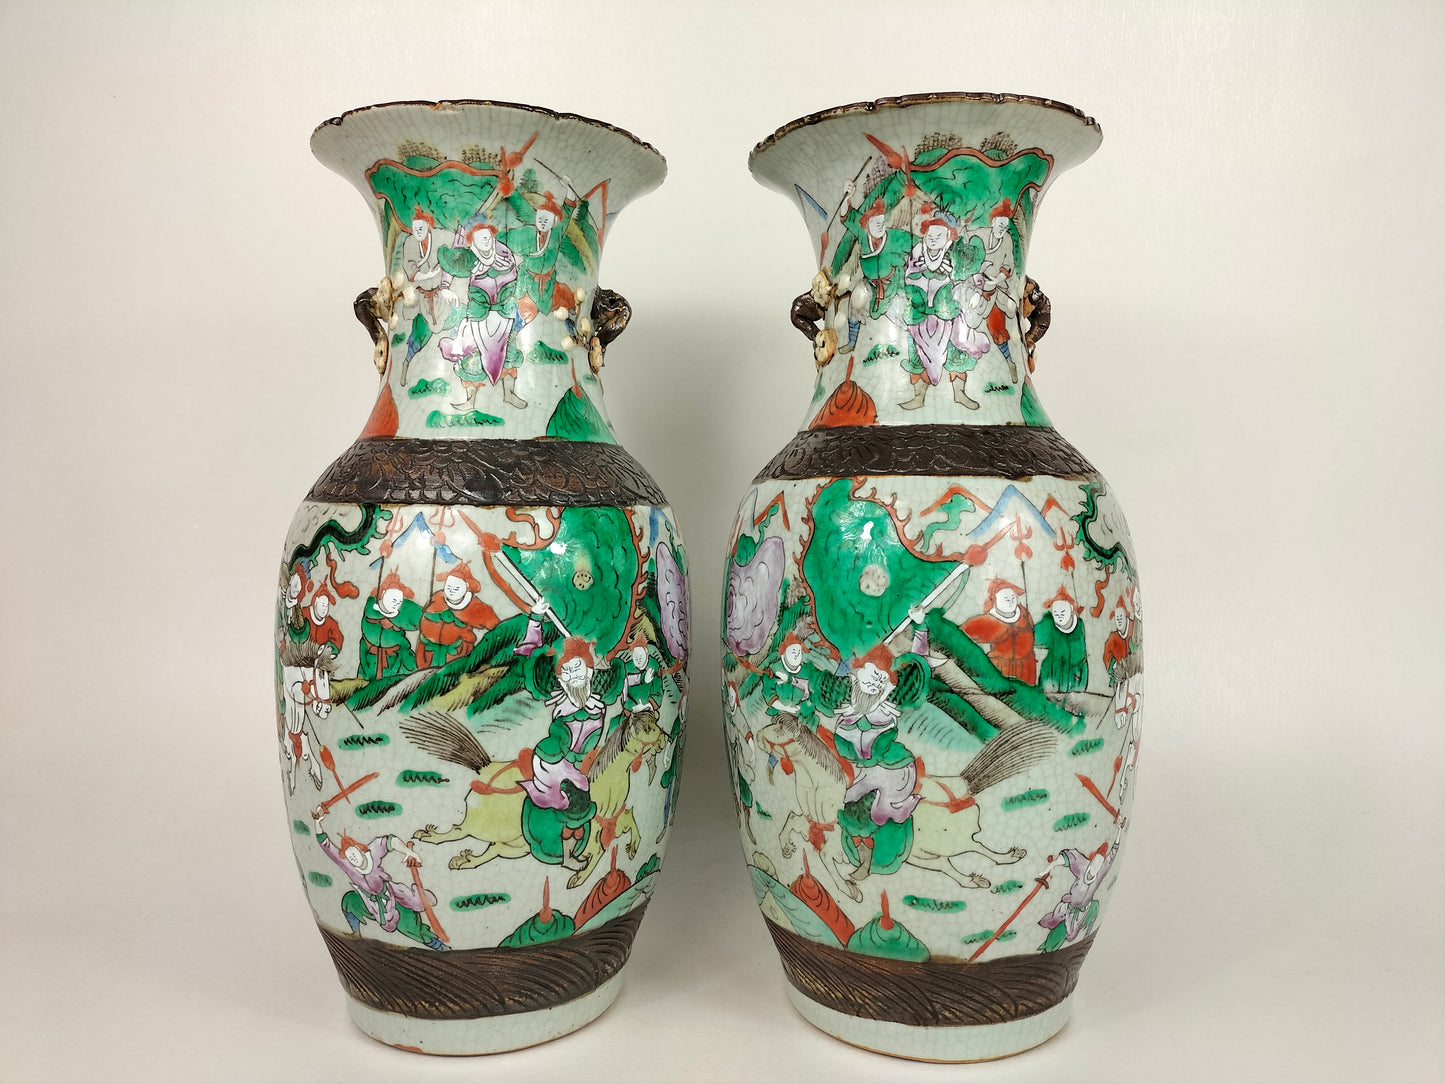 Pair of antique Chinese Nanking vases decorated with warriors // Qing Dynasty - 19th century